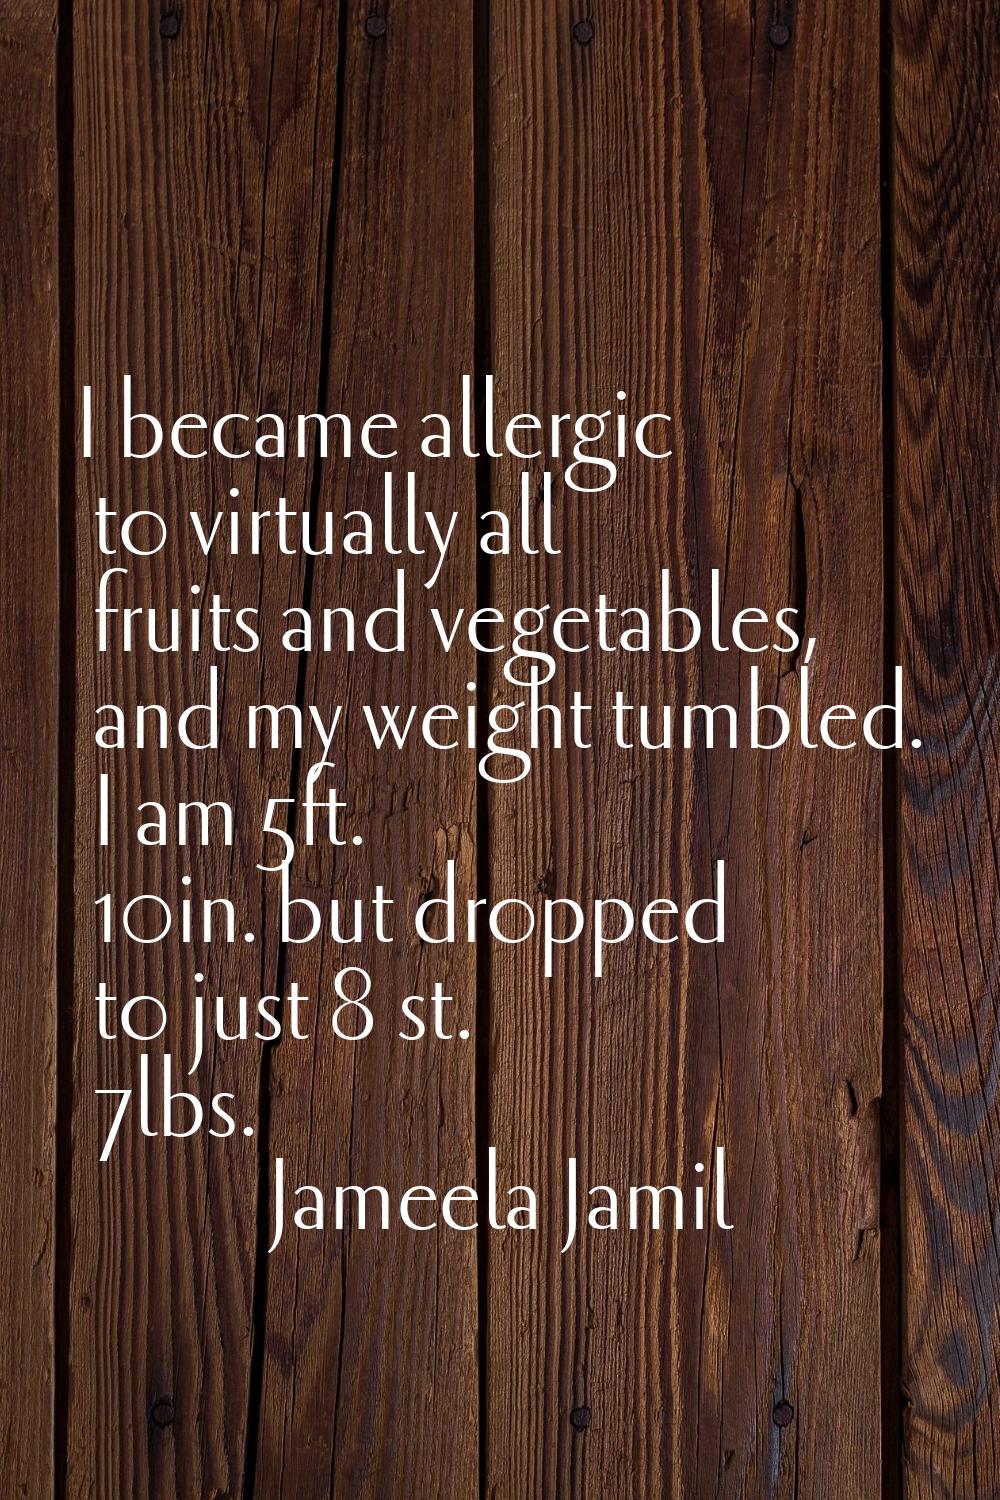 I became allergic to virtually all fruits and vegetables, and my weight tumbled. I am 5ft. 10in. bu